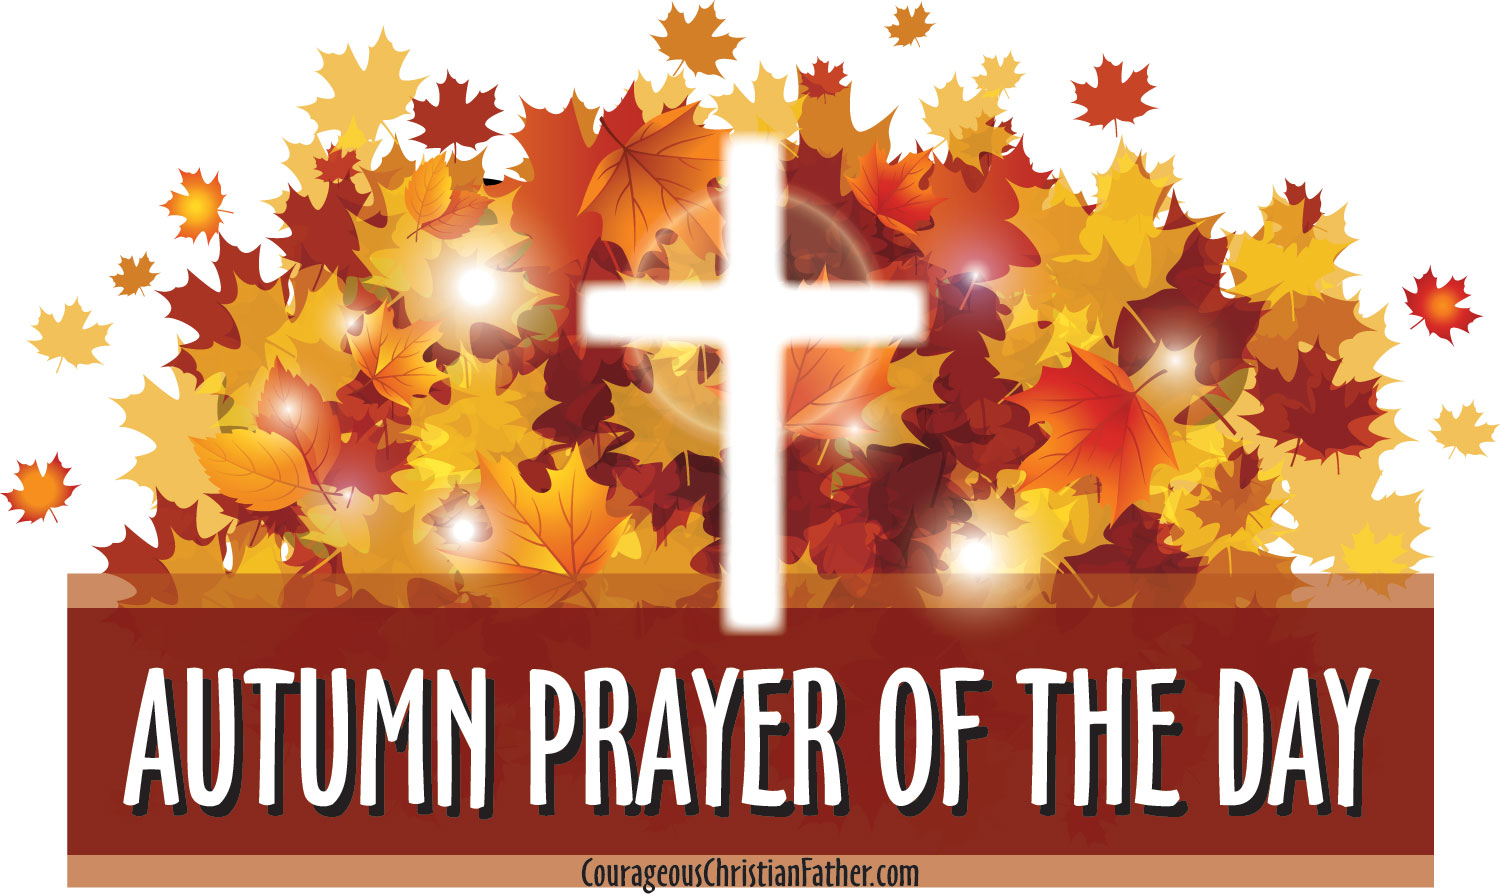 Autumn Prayer of the Day - Today's prayer of the day is topical and focuses on the season of Autumn, also known as Fall. #Autumn